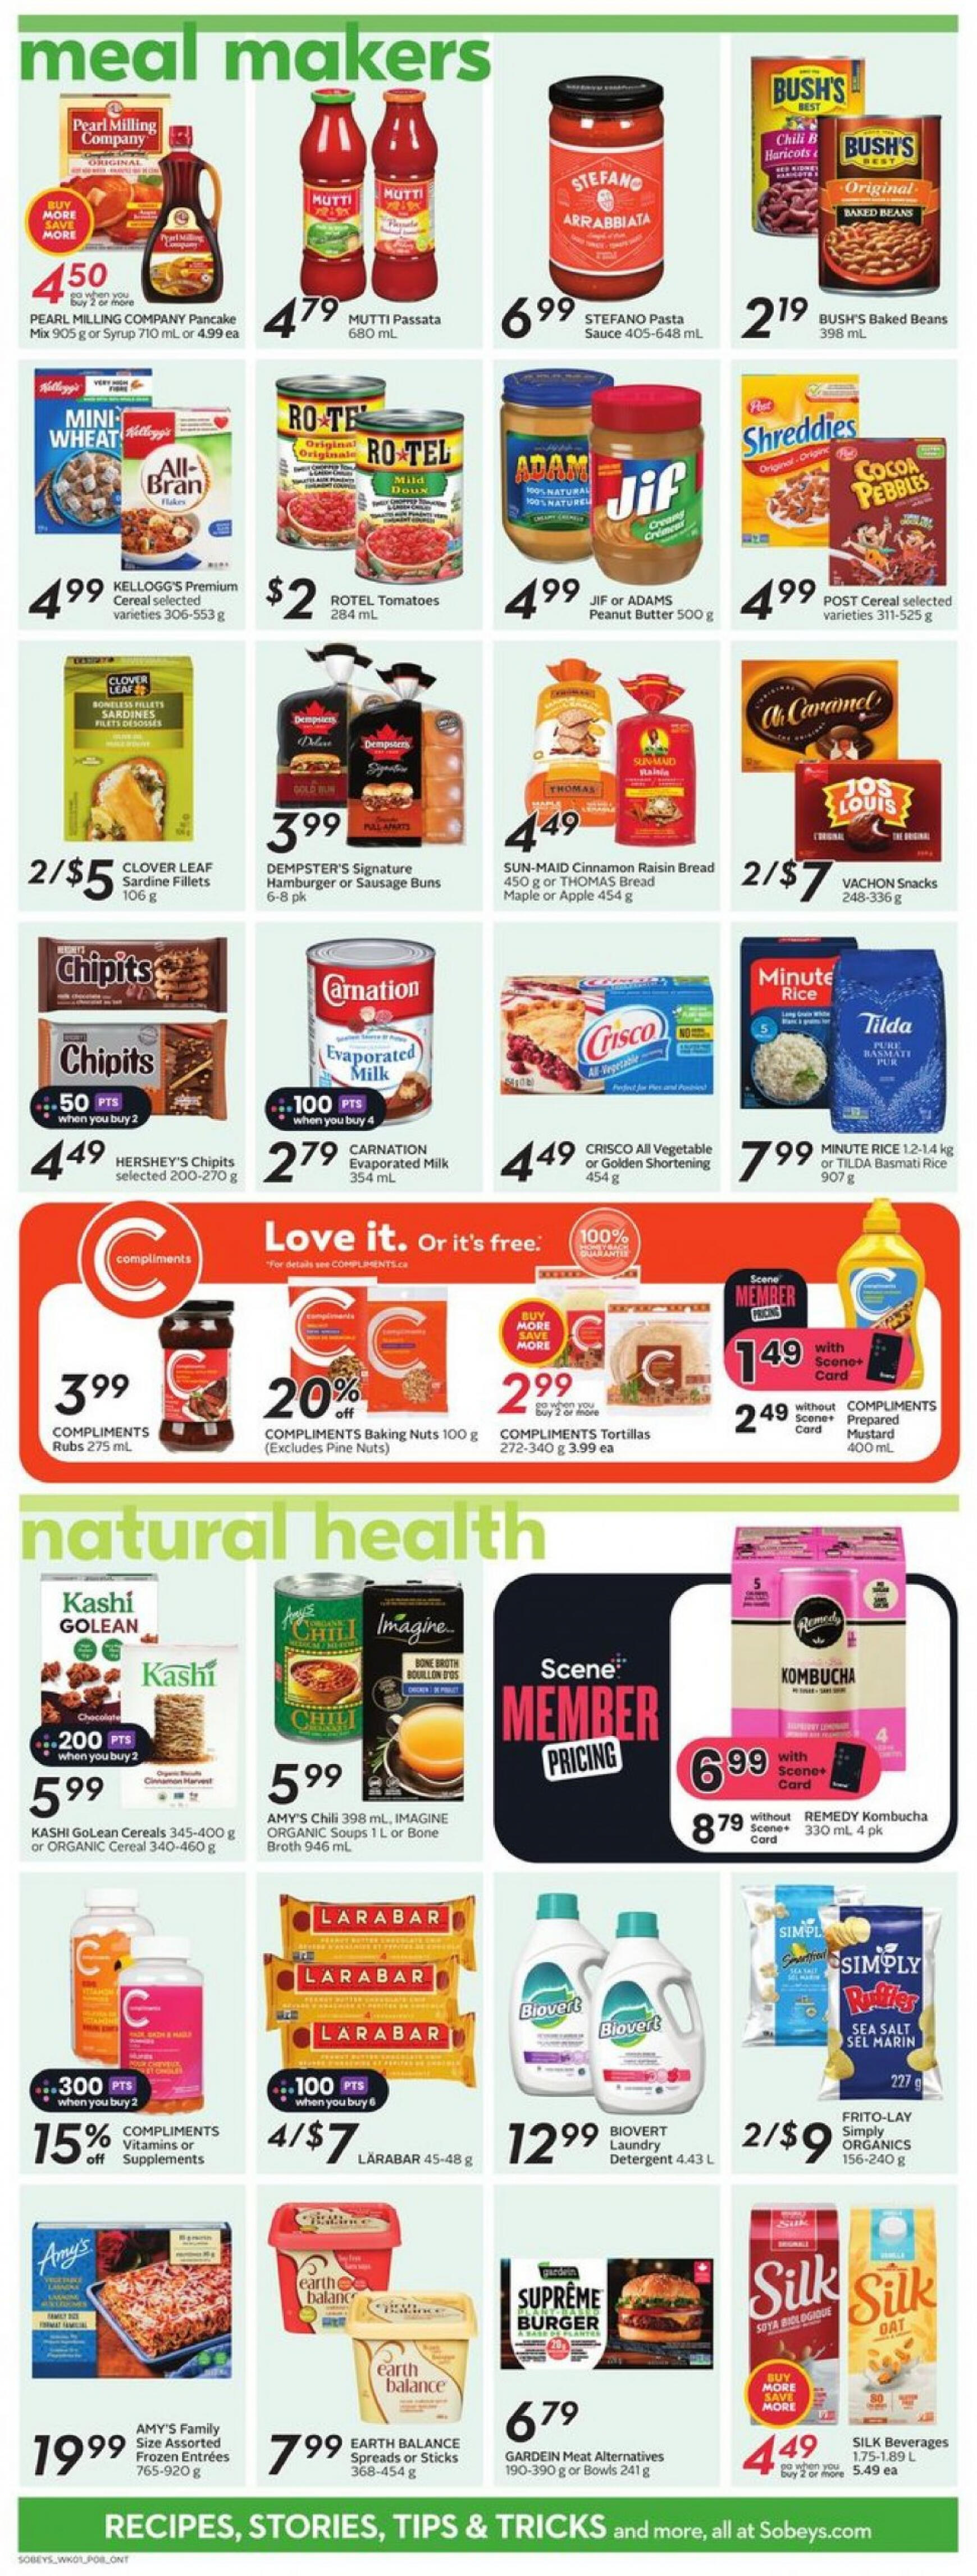 sobeys - Sobeys - Weekly Flyer - Ontario flyer current 02.05. - 08.05. - page: 15